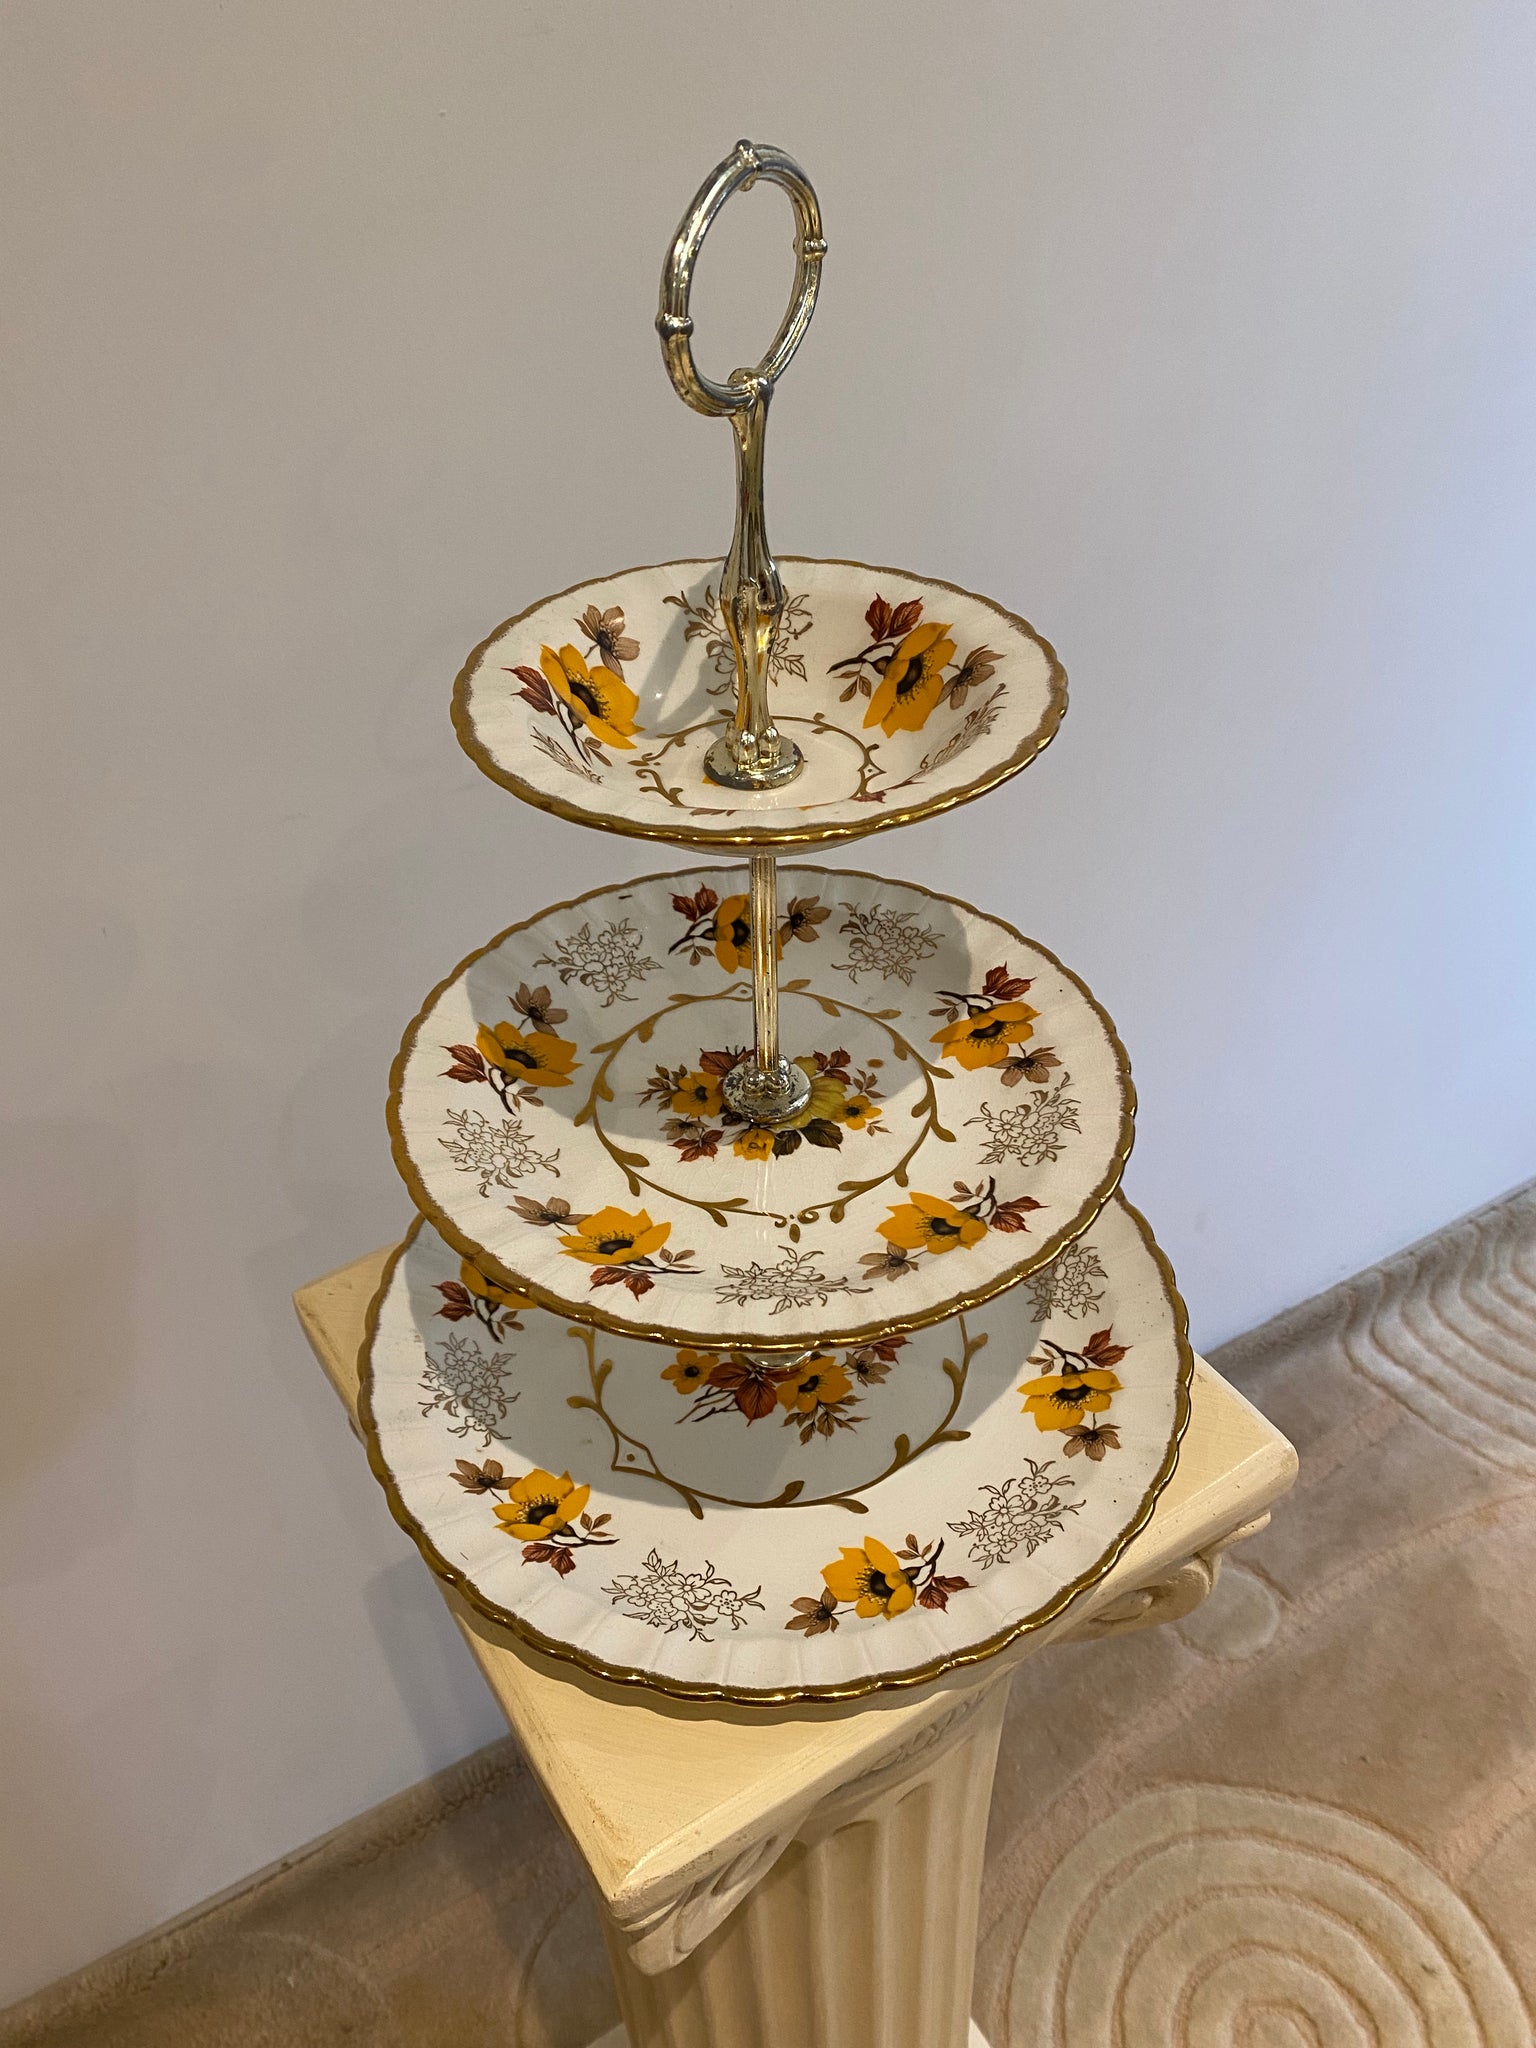 Floral tiered desserts stand